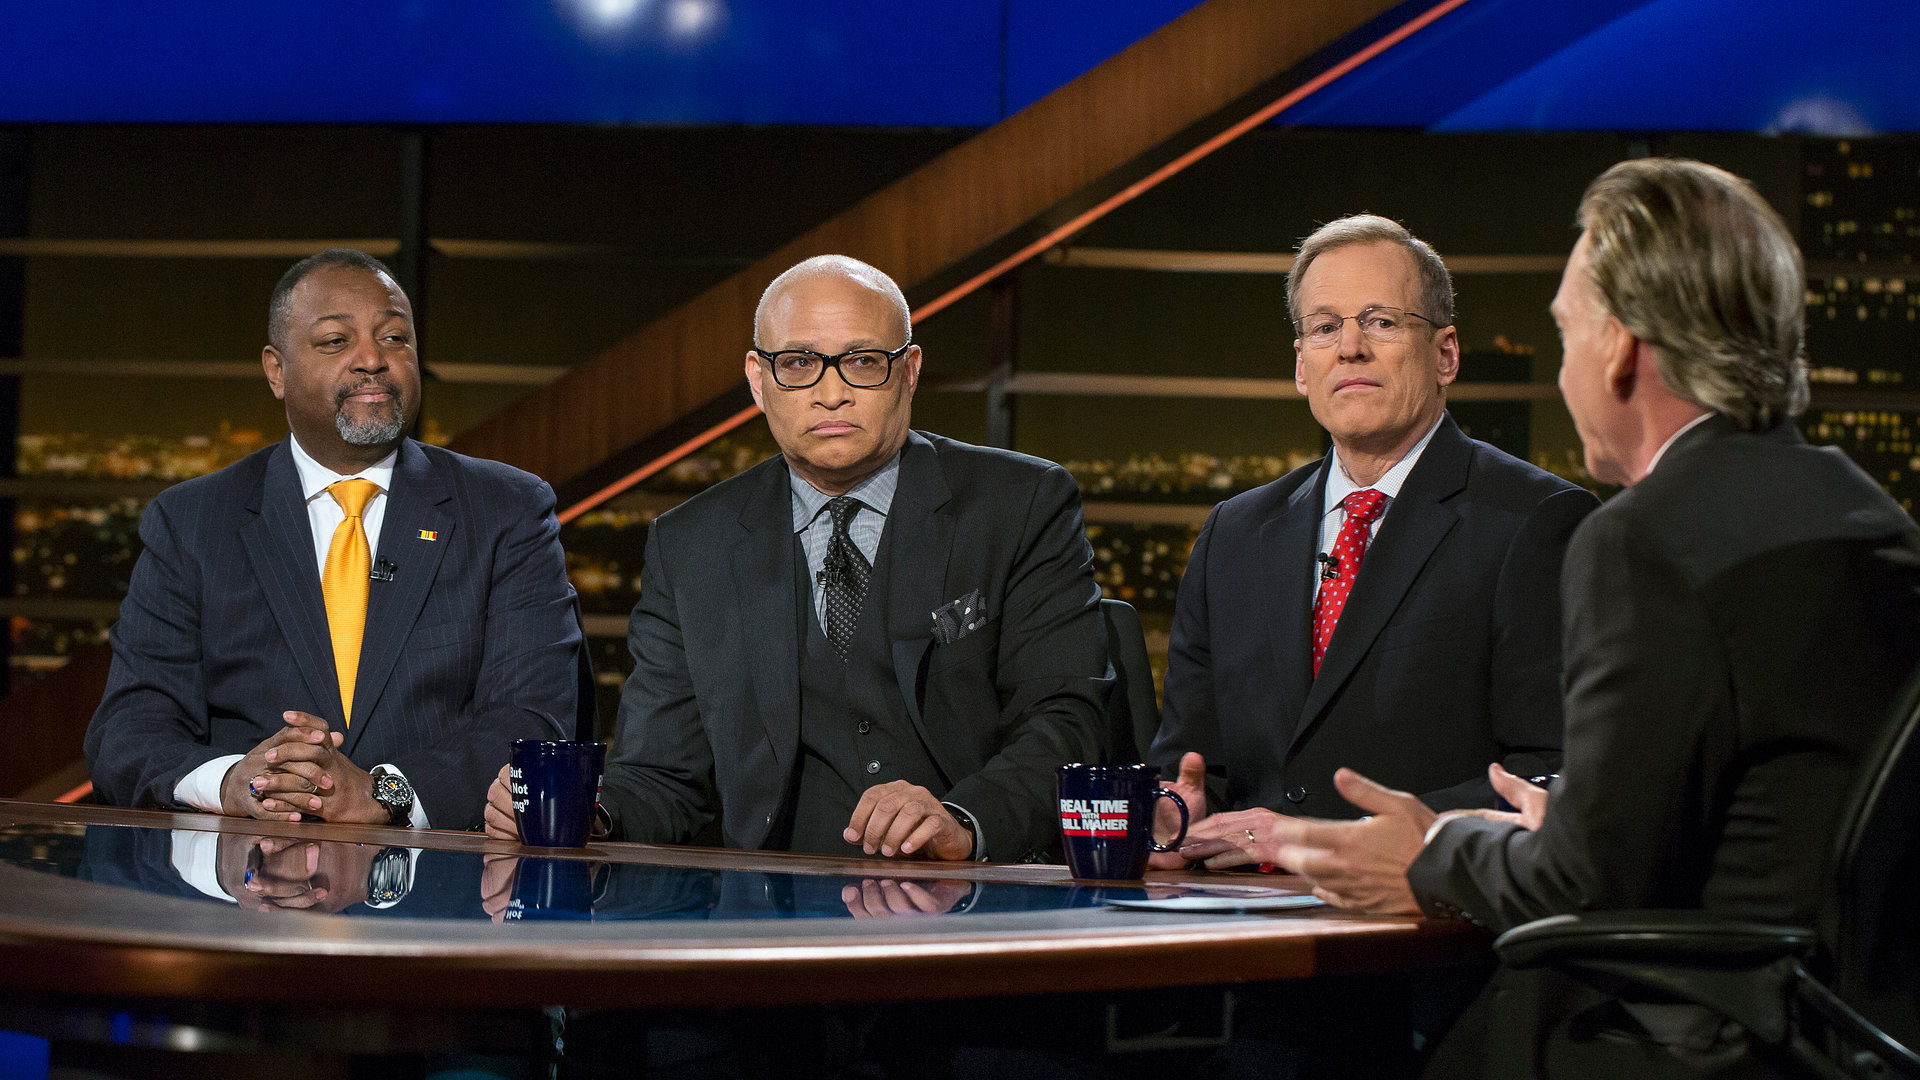 Milo Yiannopoulos, Leah Remini, Jack Kingston, Malcolm Nance, Larry Wilmore